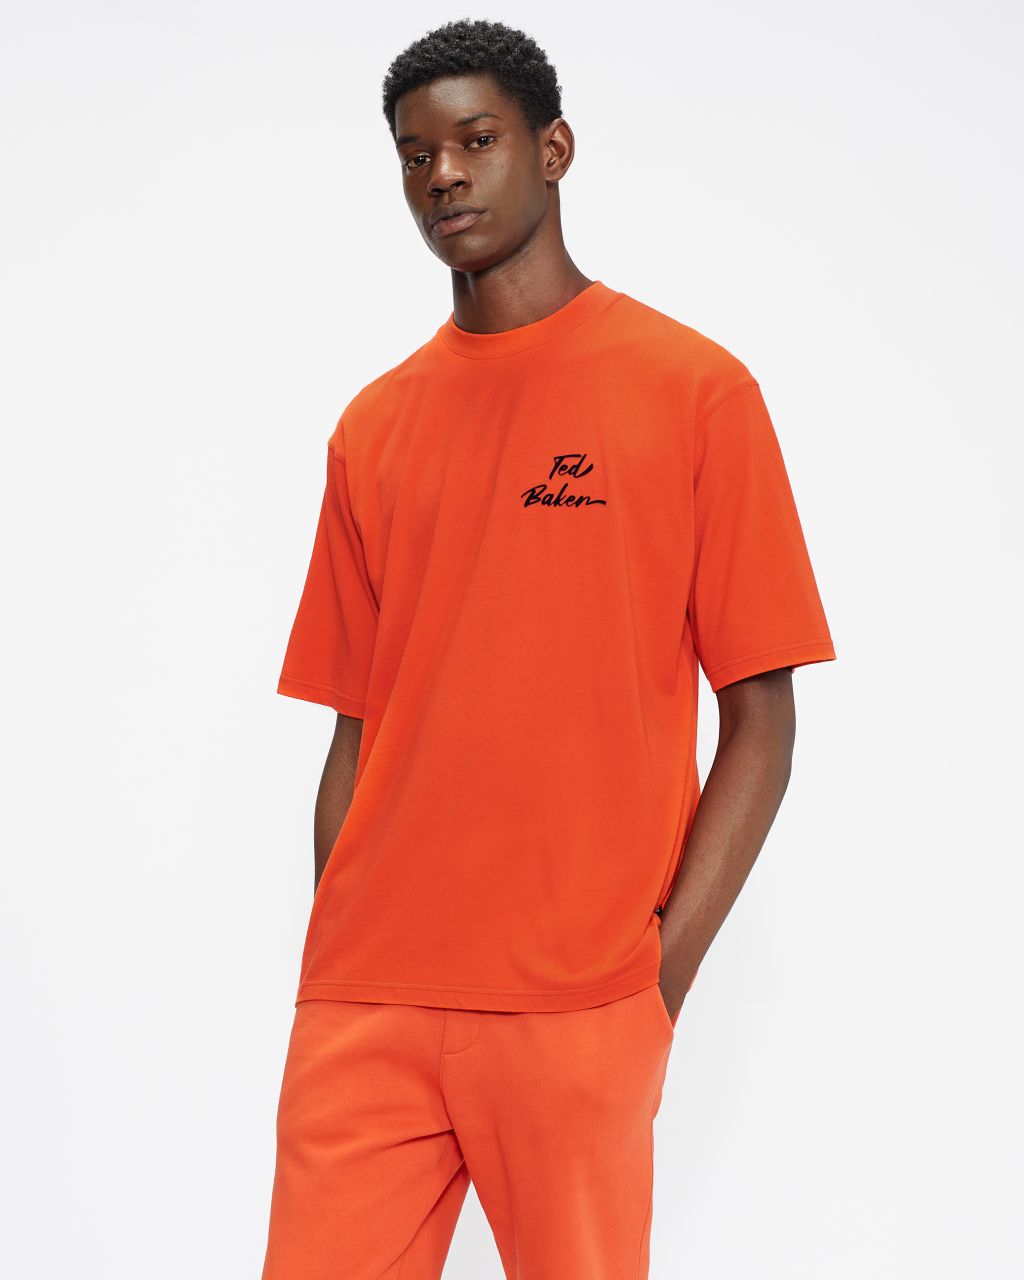 Ted Baker Men's SS Oversized Branded T-Shirt in Orange, Champa, Cotton product